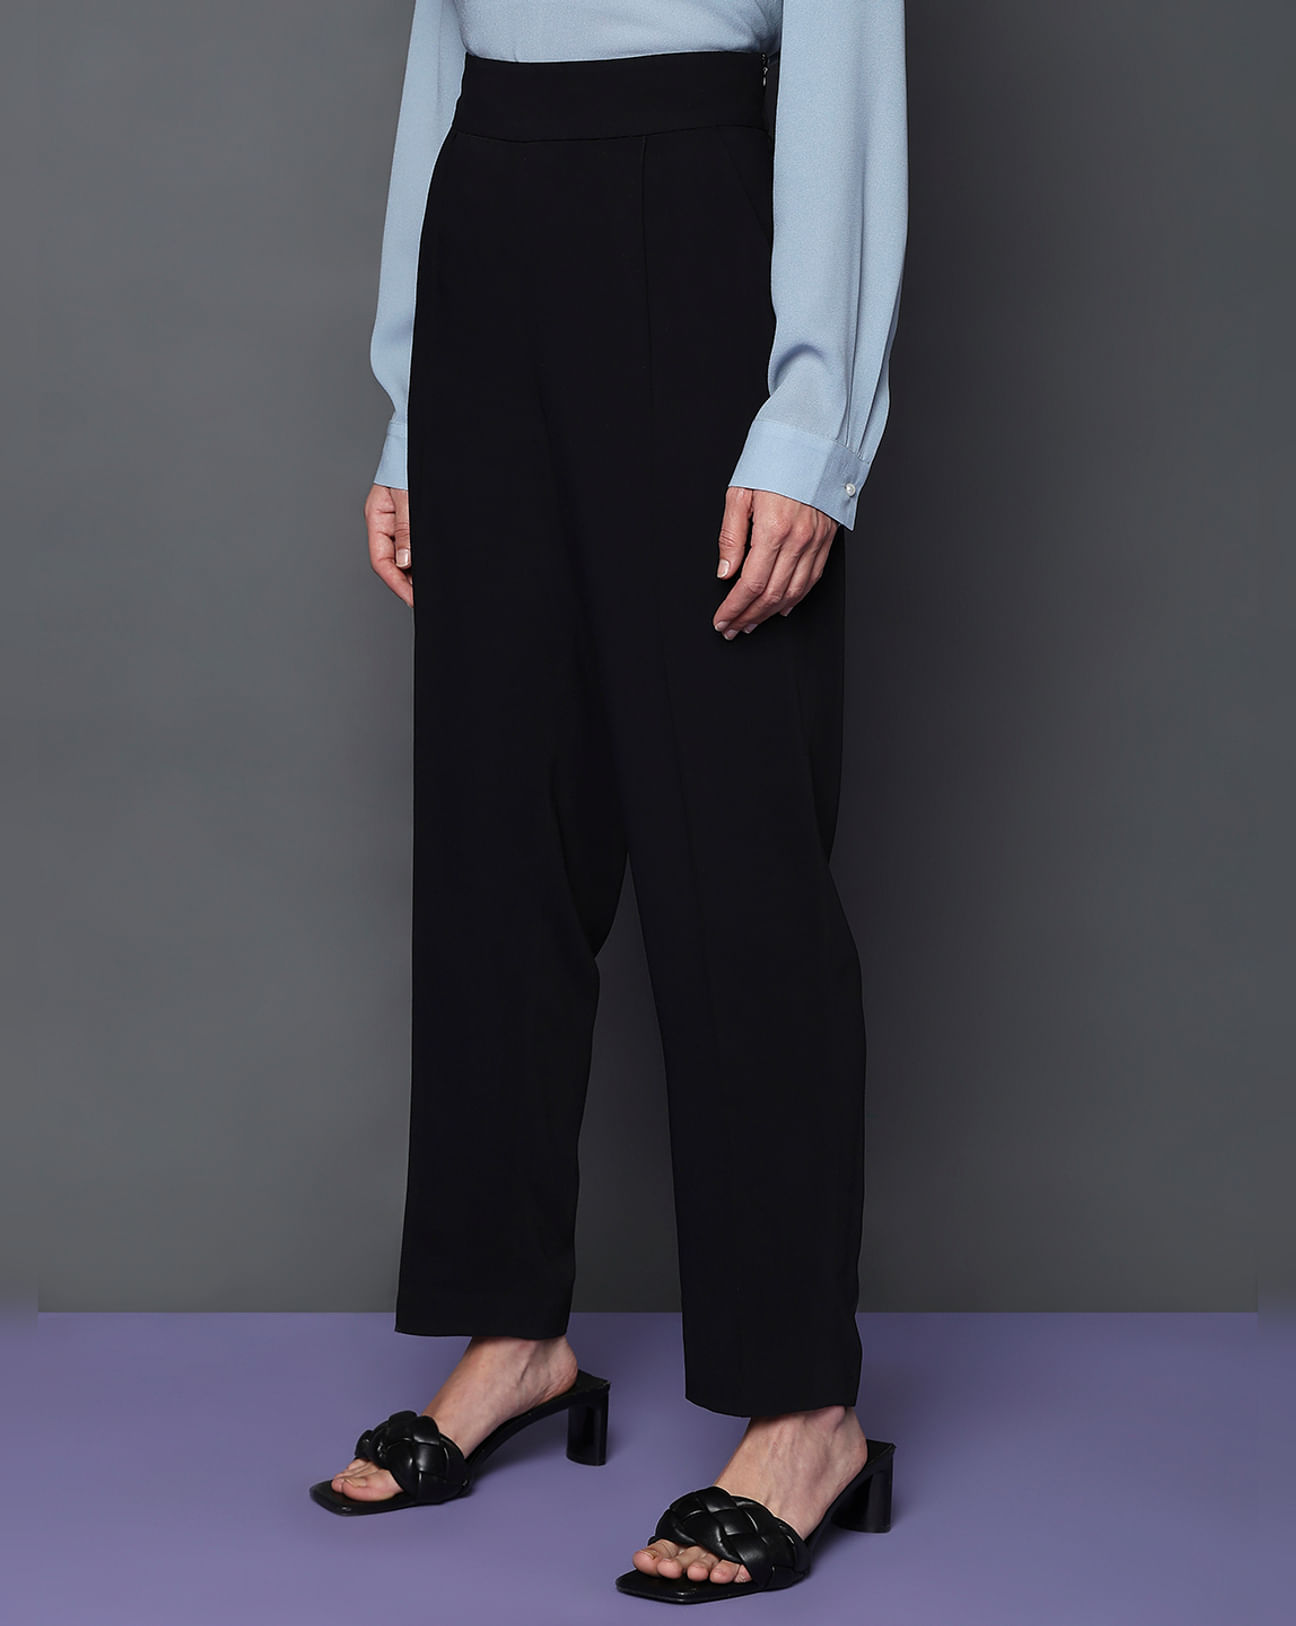 high-waisted pants with tapered legs